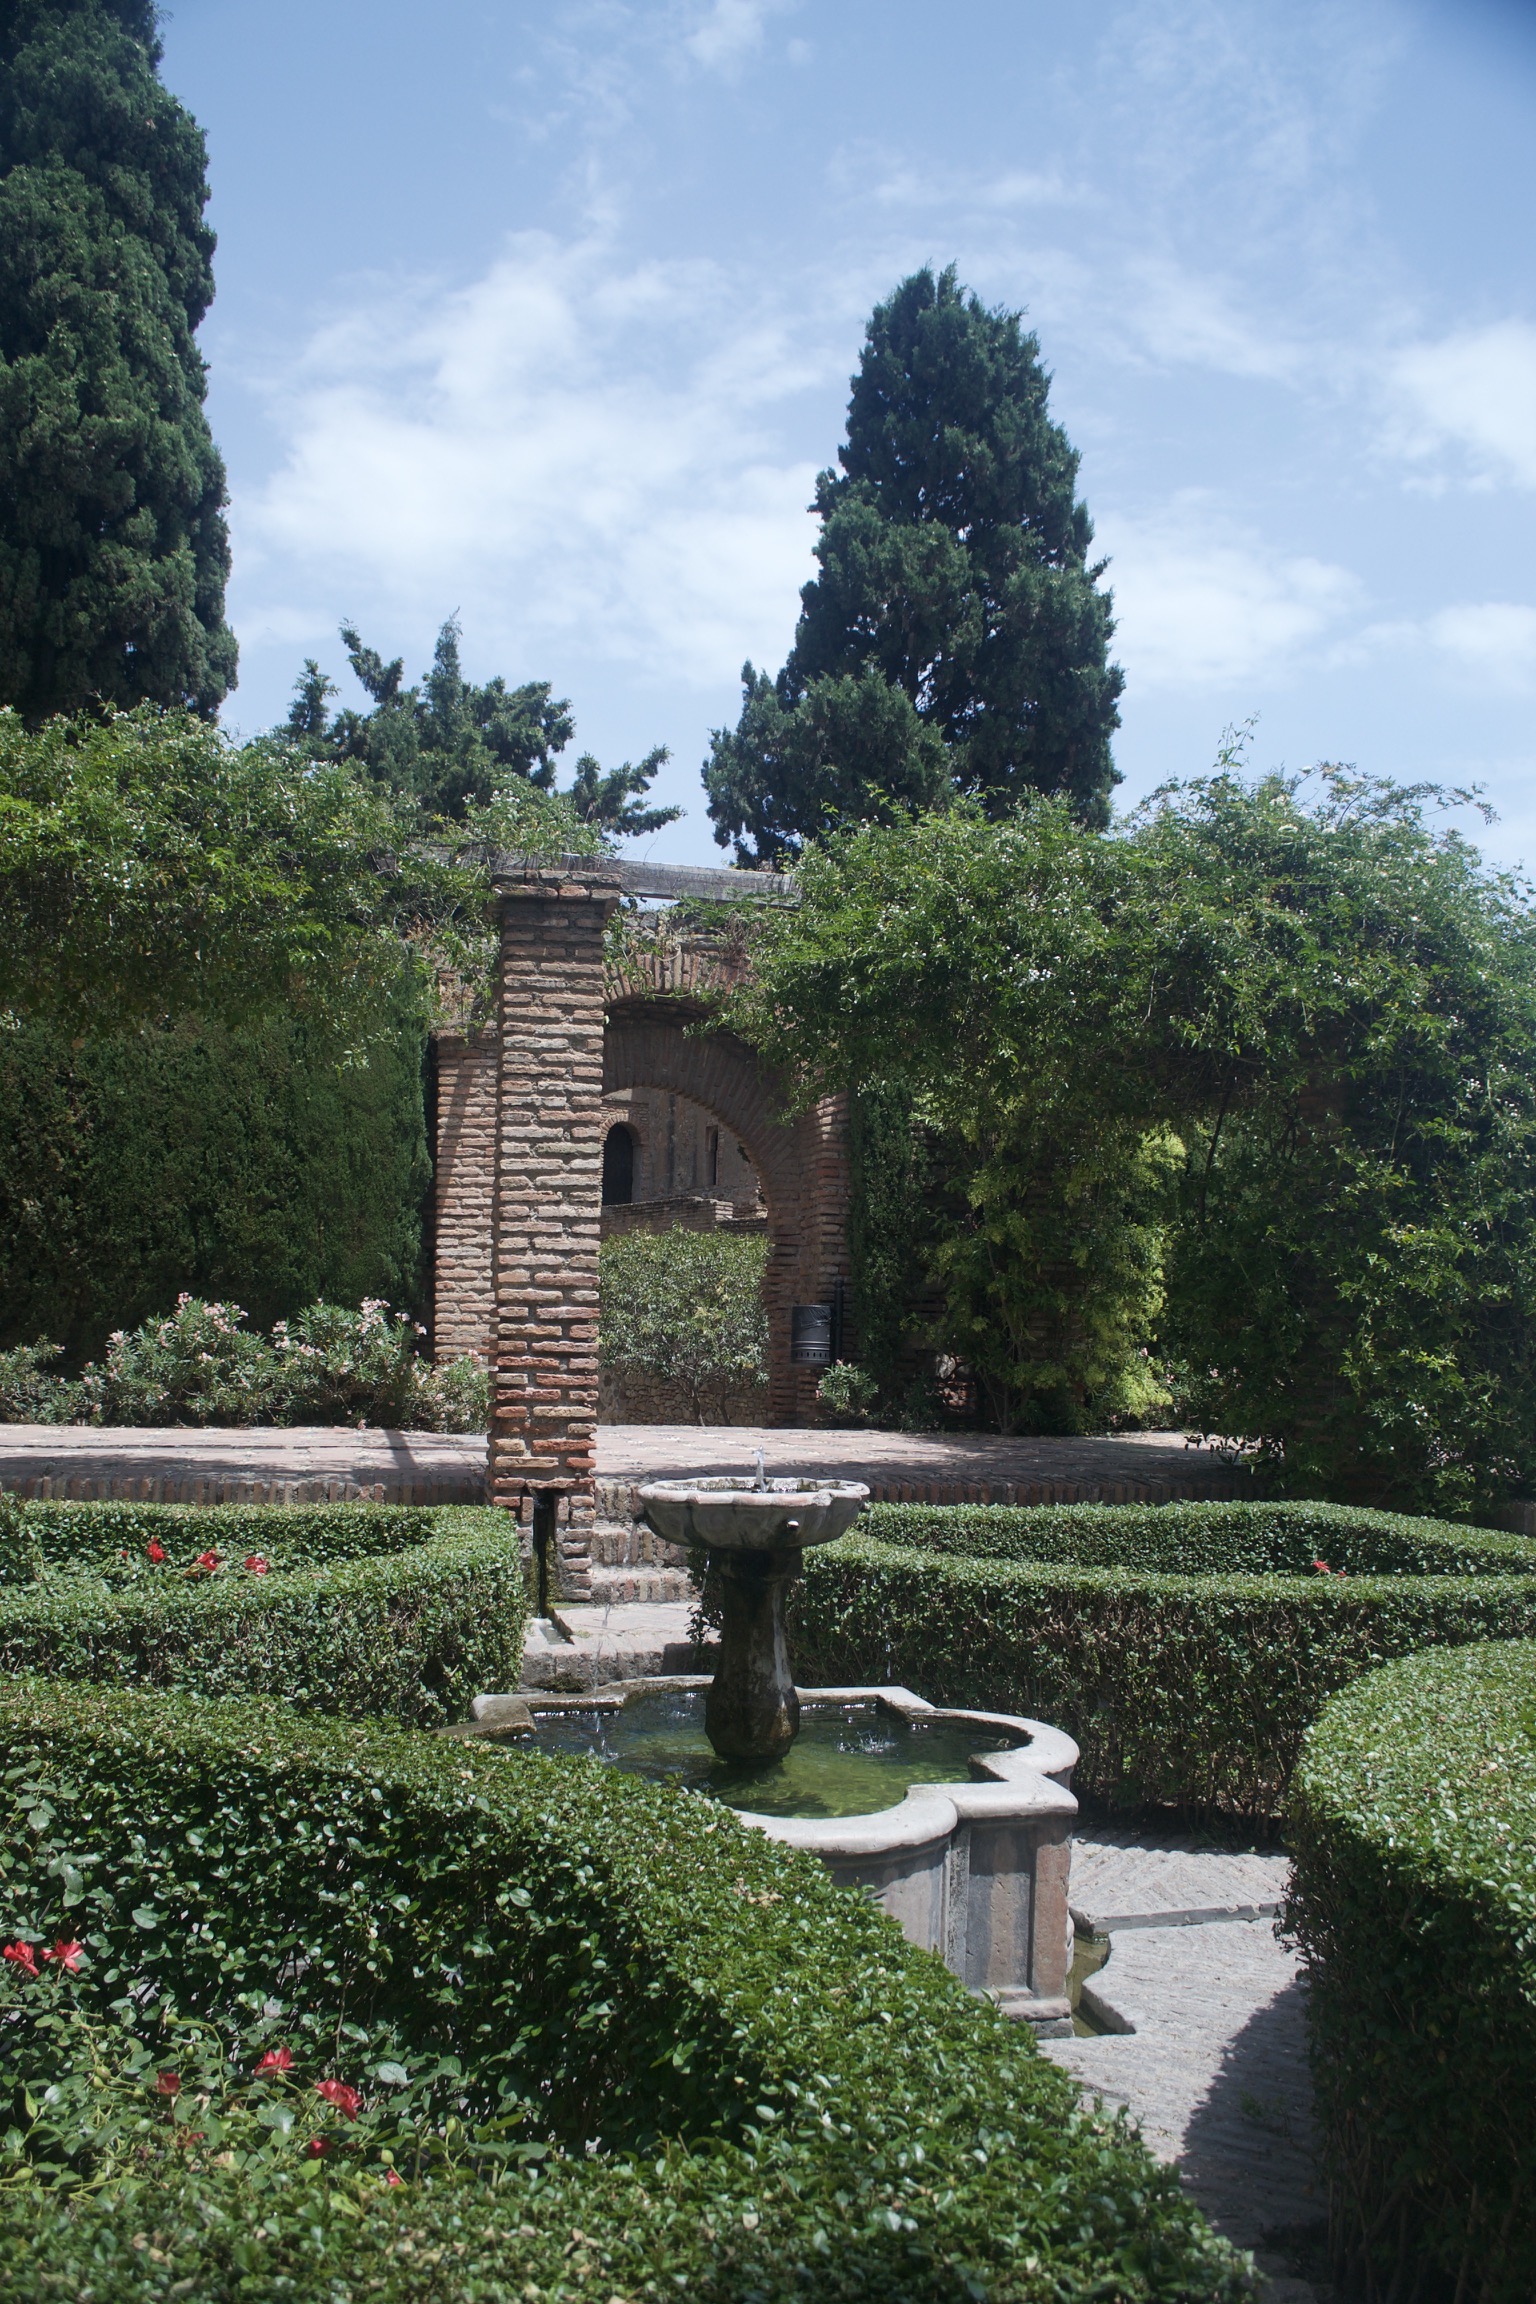 A small fountain sits surrounded by bushes and garden paths.